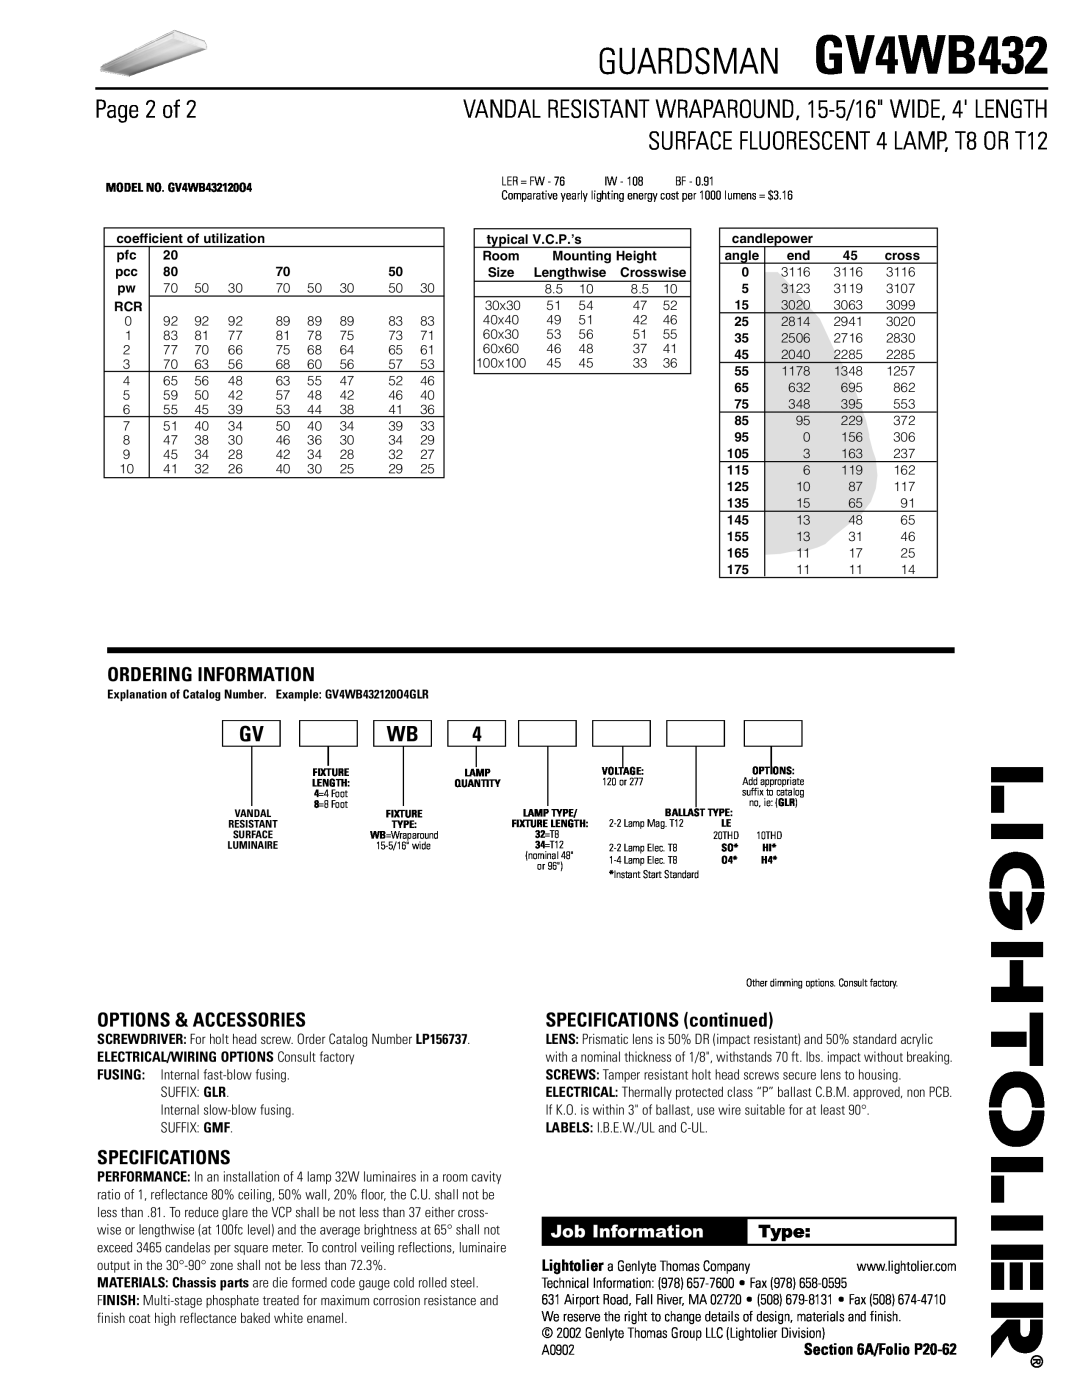 Lightolier GV4WB432 Page 2 of, SURFACE FLUORESCENT 4 LAMP, T8 OR T12, Ordering Information, Options & Accessories, Type 